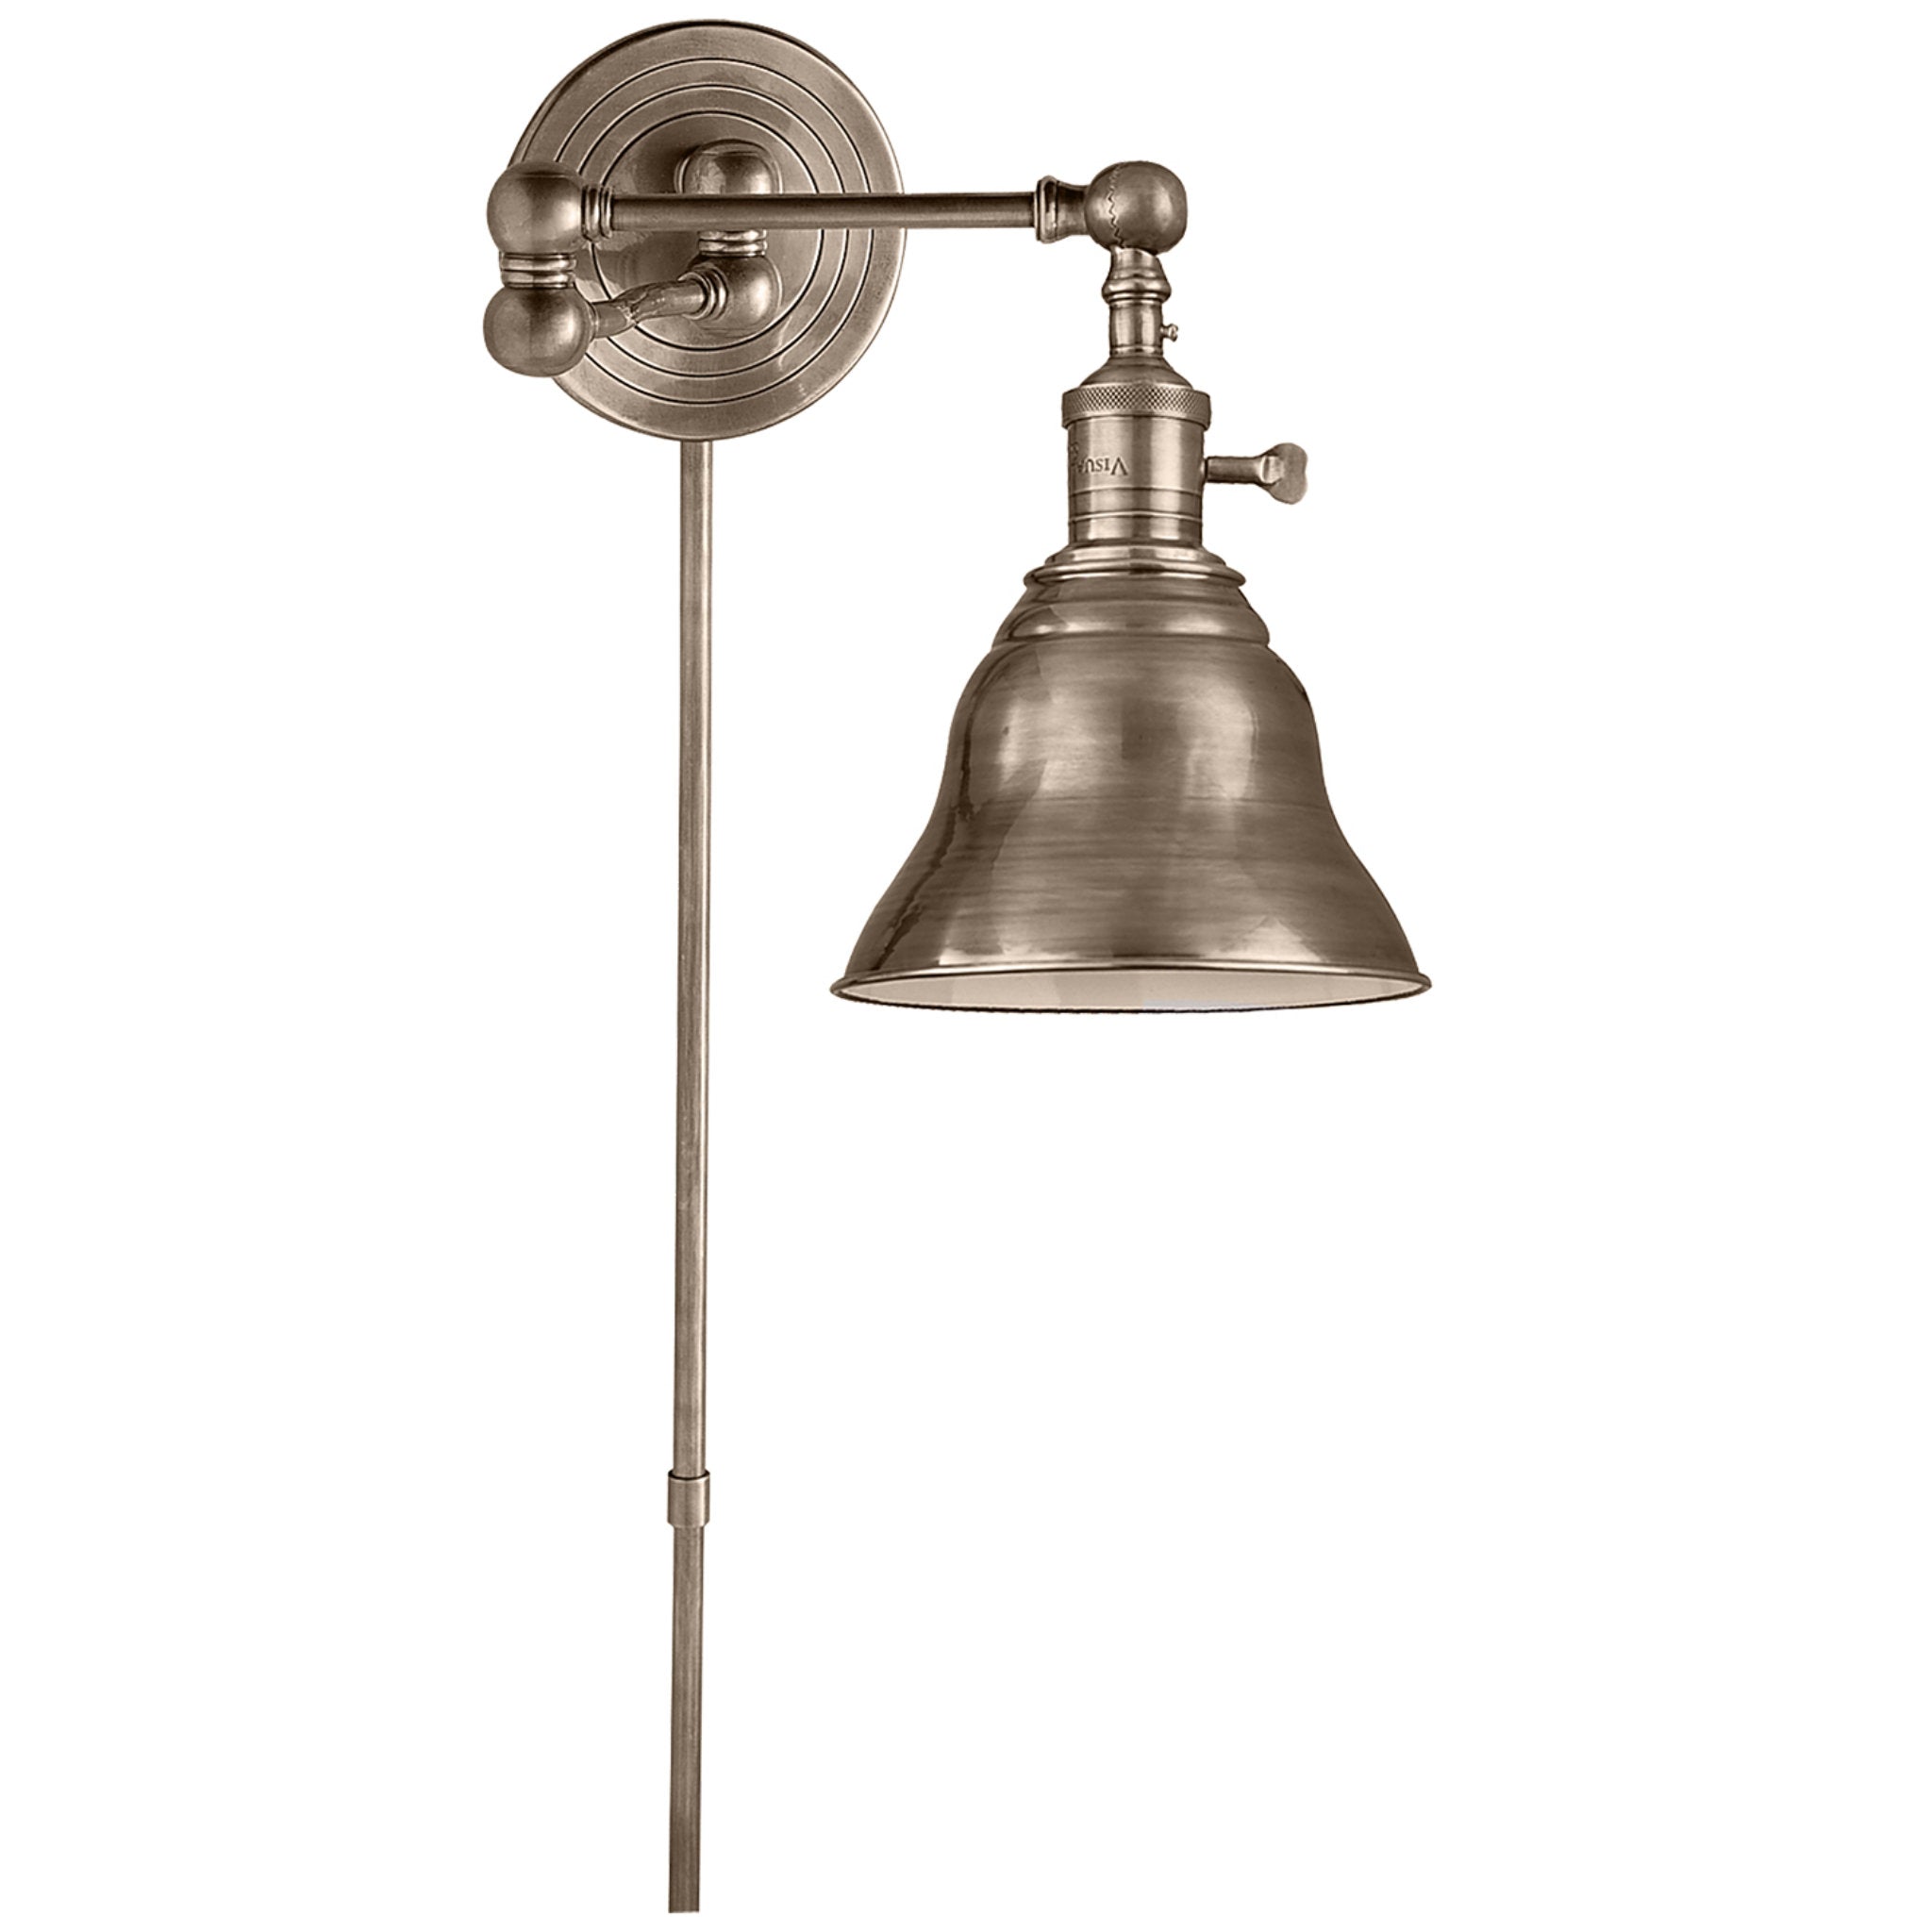 Chapman & Myers Boston Swing Arm in Antique Nickel with SLE Shade